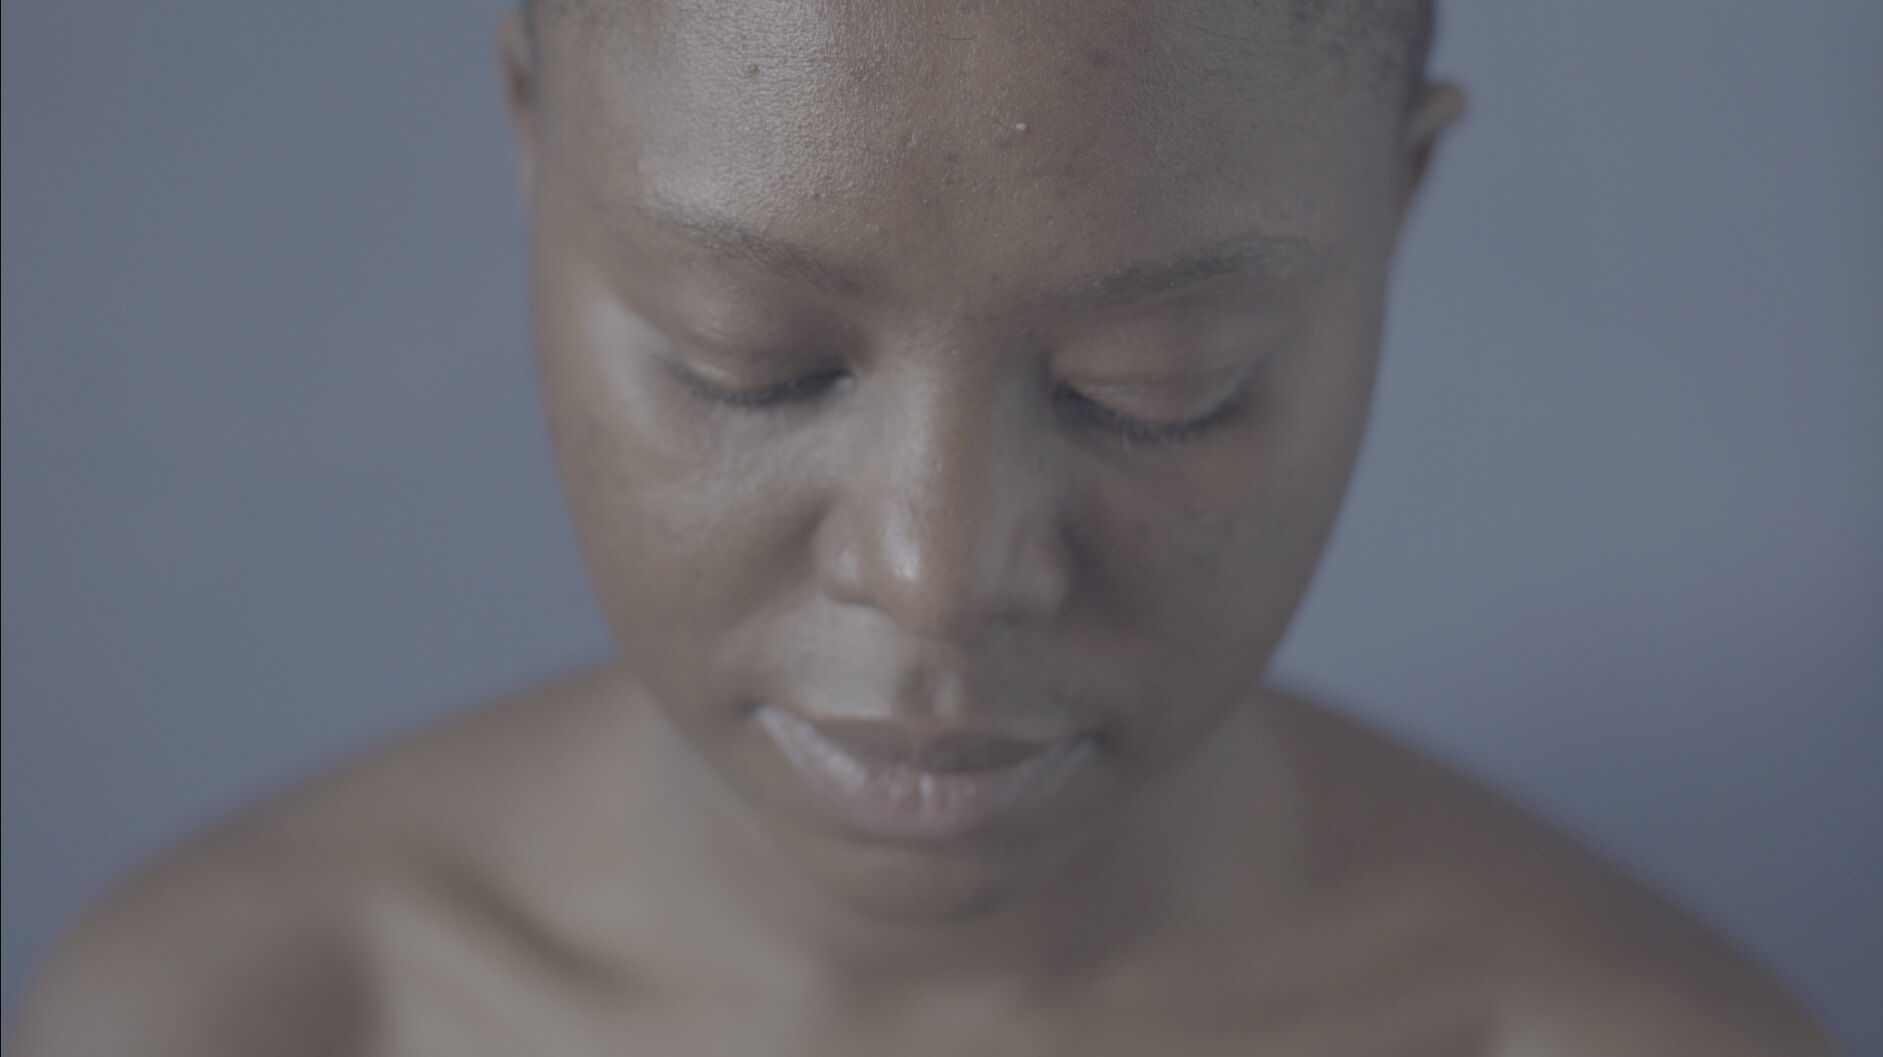 Still from Milisuthando (working title). A close-up, downward angle of a woman who is looking down and away from the camera. The background is blue.